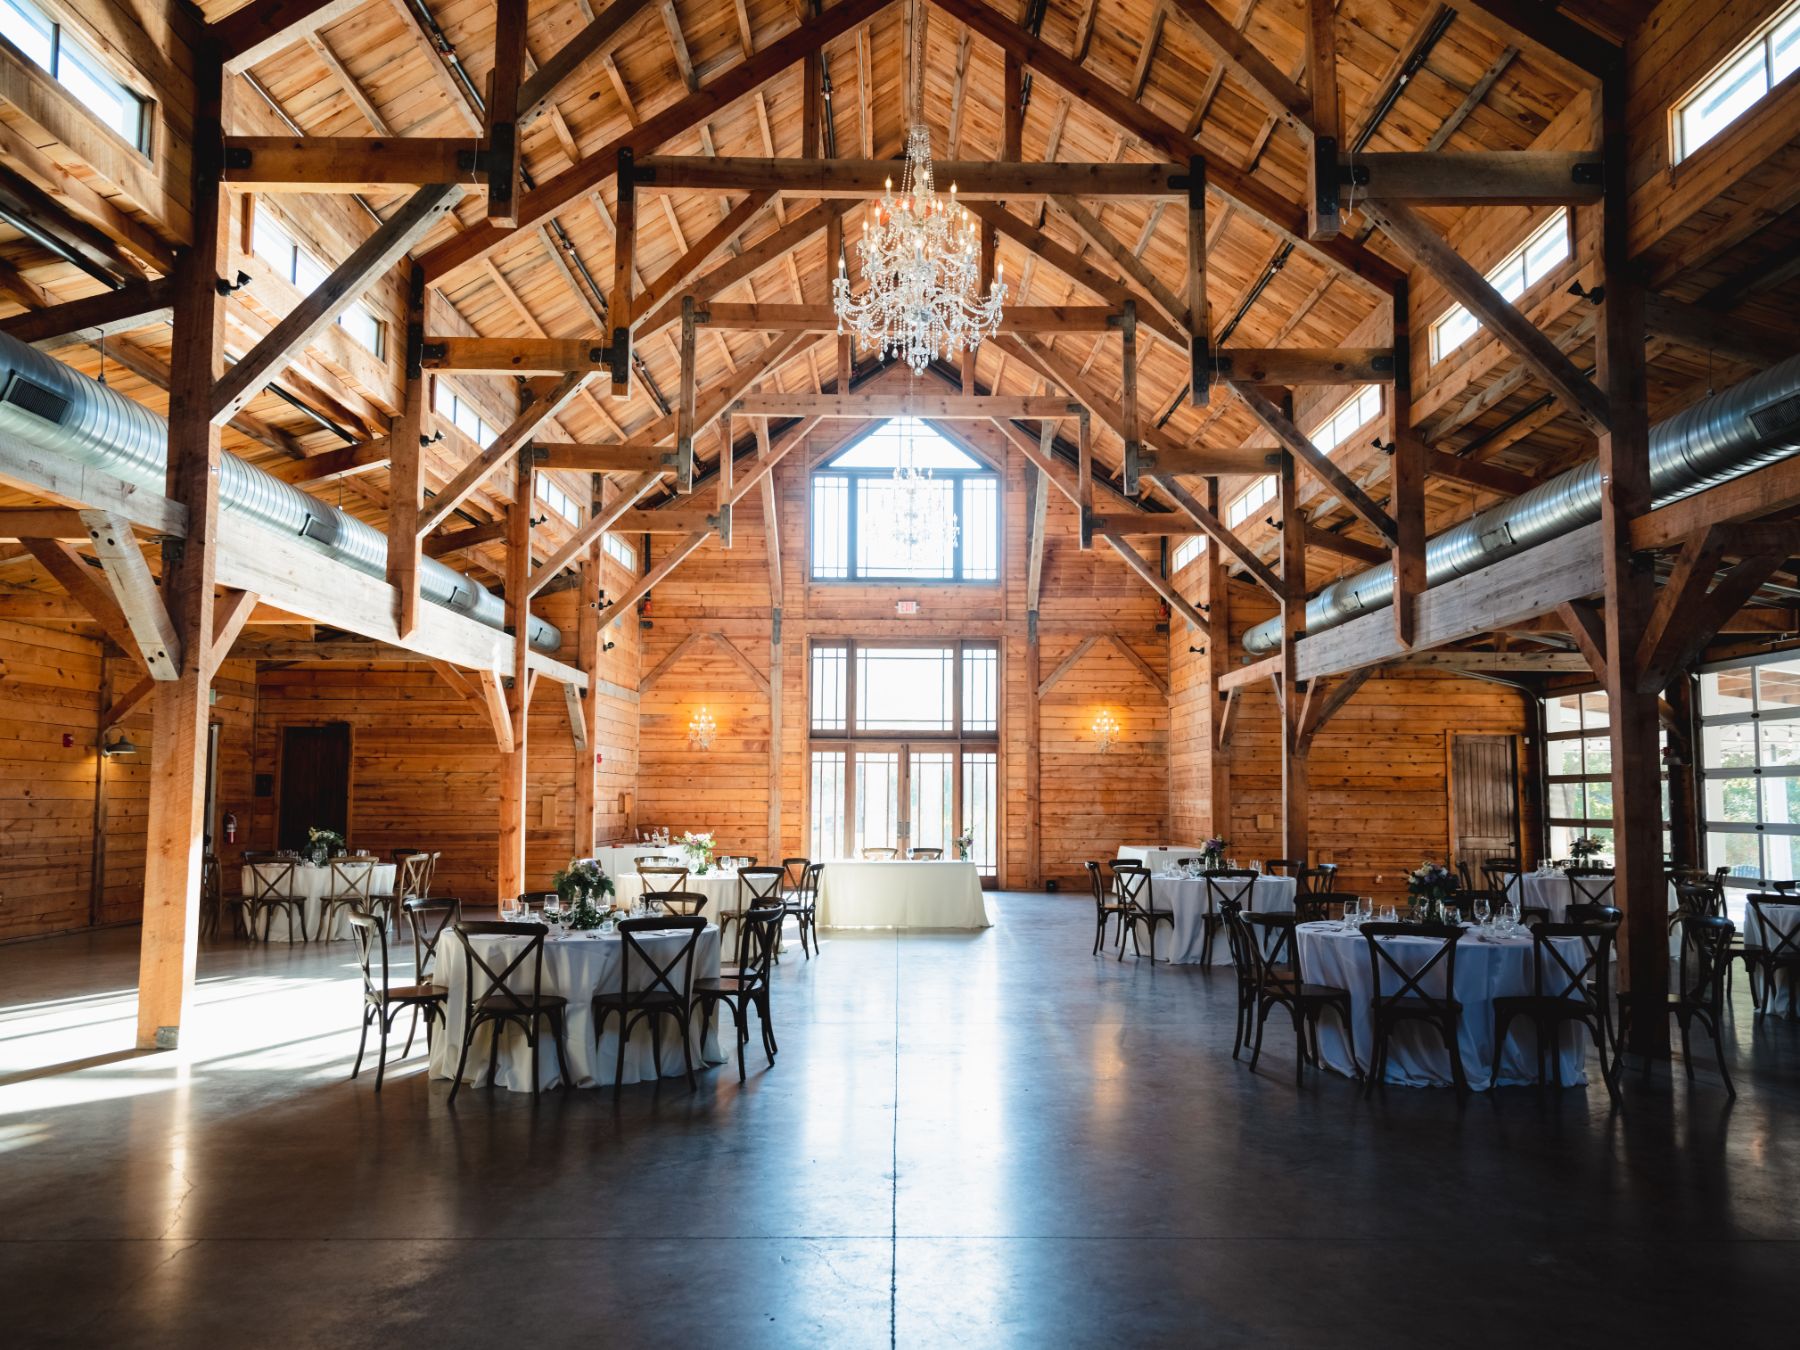 I'm inside of a wooden farm with exposed wood, walls and beans, lots of bright light, peering through large windows, and a stunning crystal chandelier at the Addison Grove wedding venue in Austin Texas.